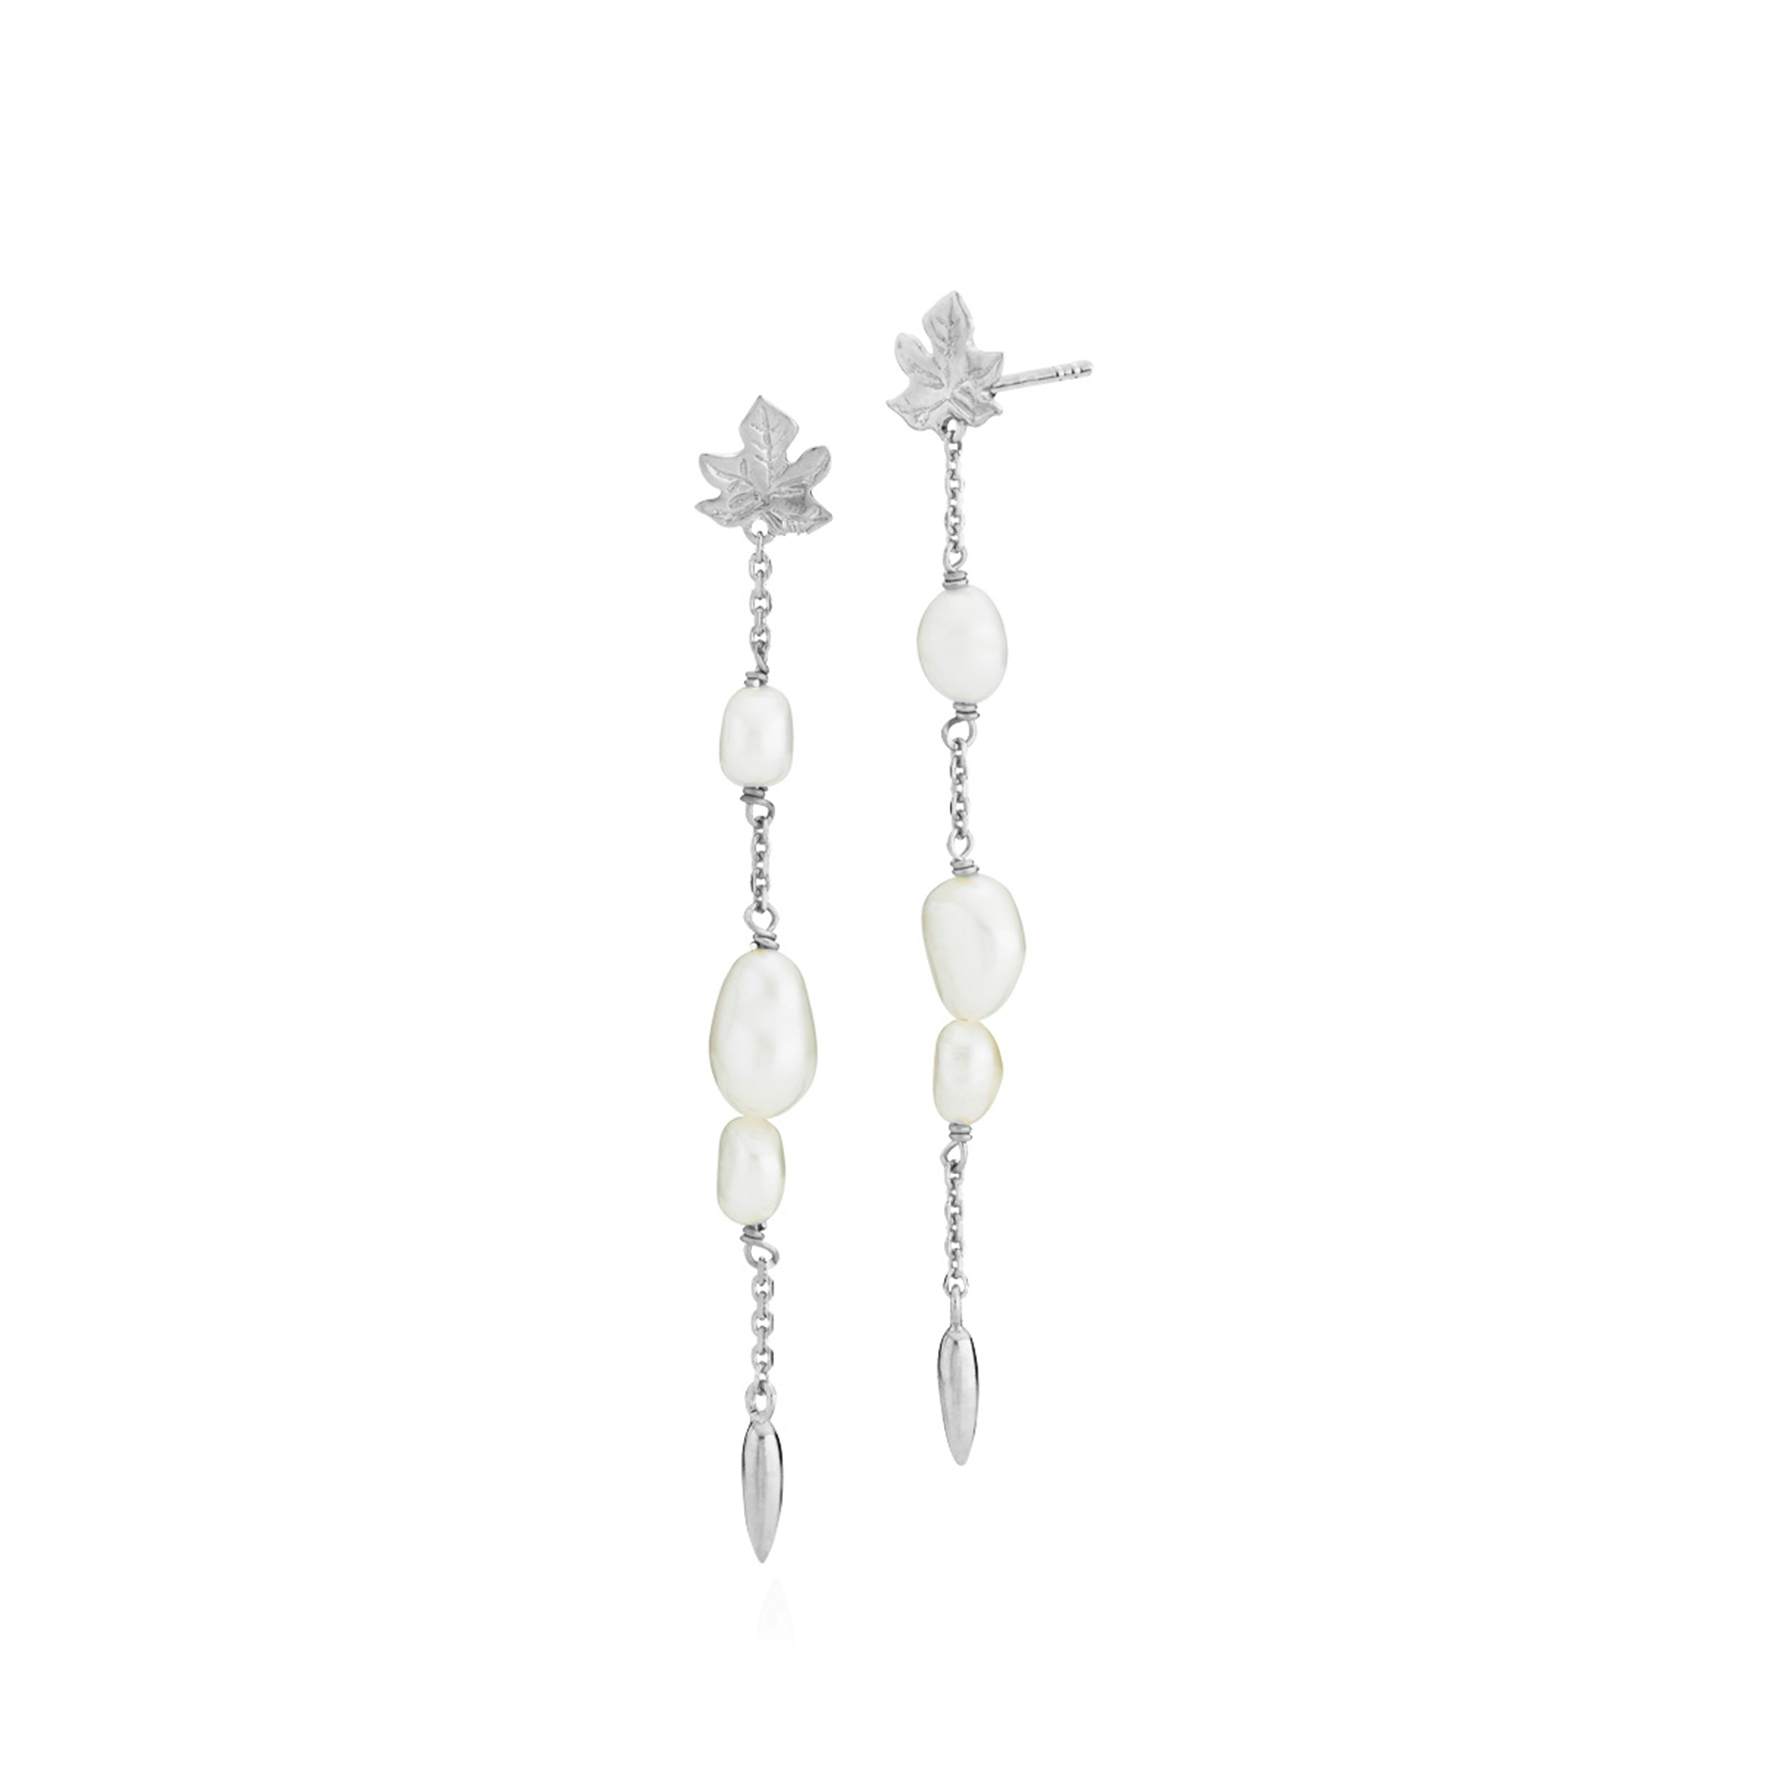 Caley Long Earrings from Izabel Camille in Silver Sterling 925